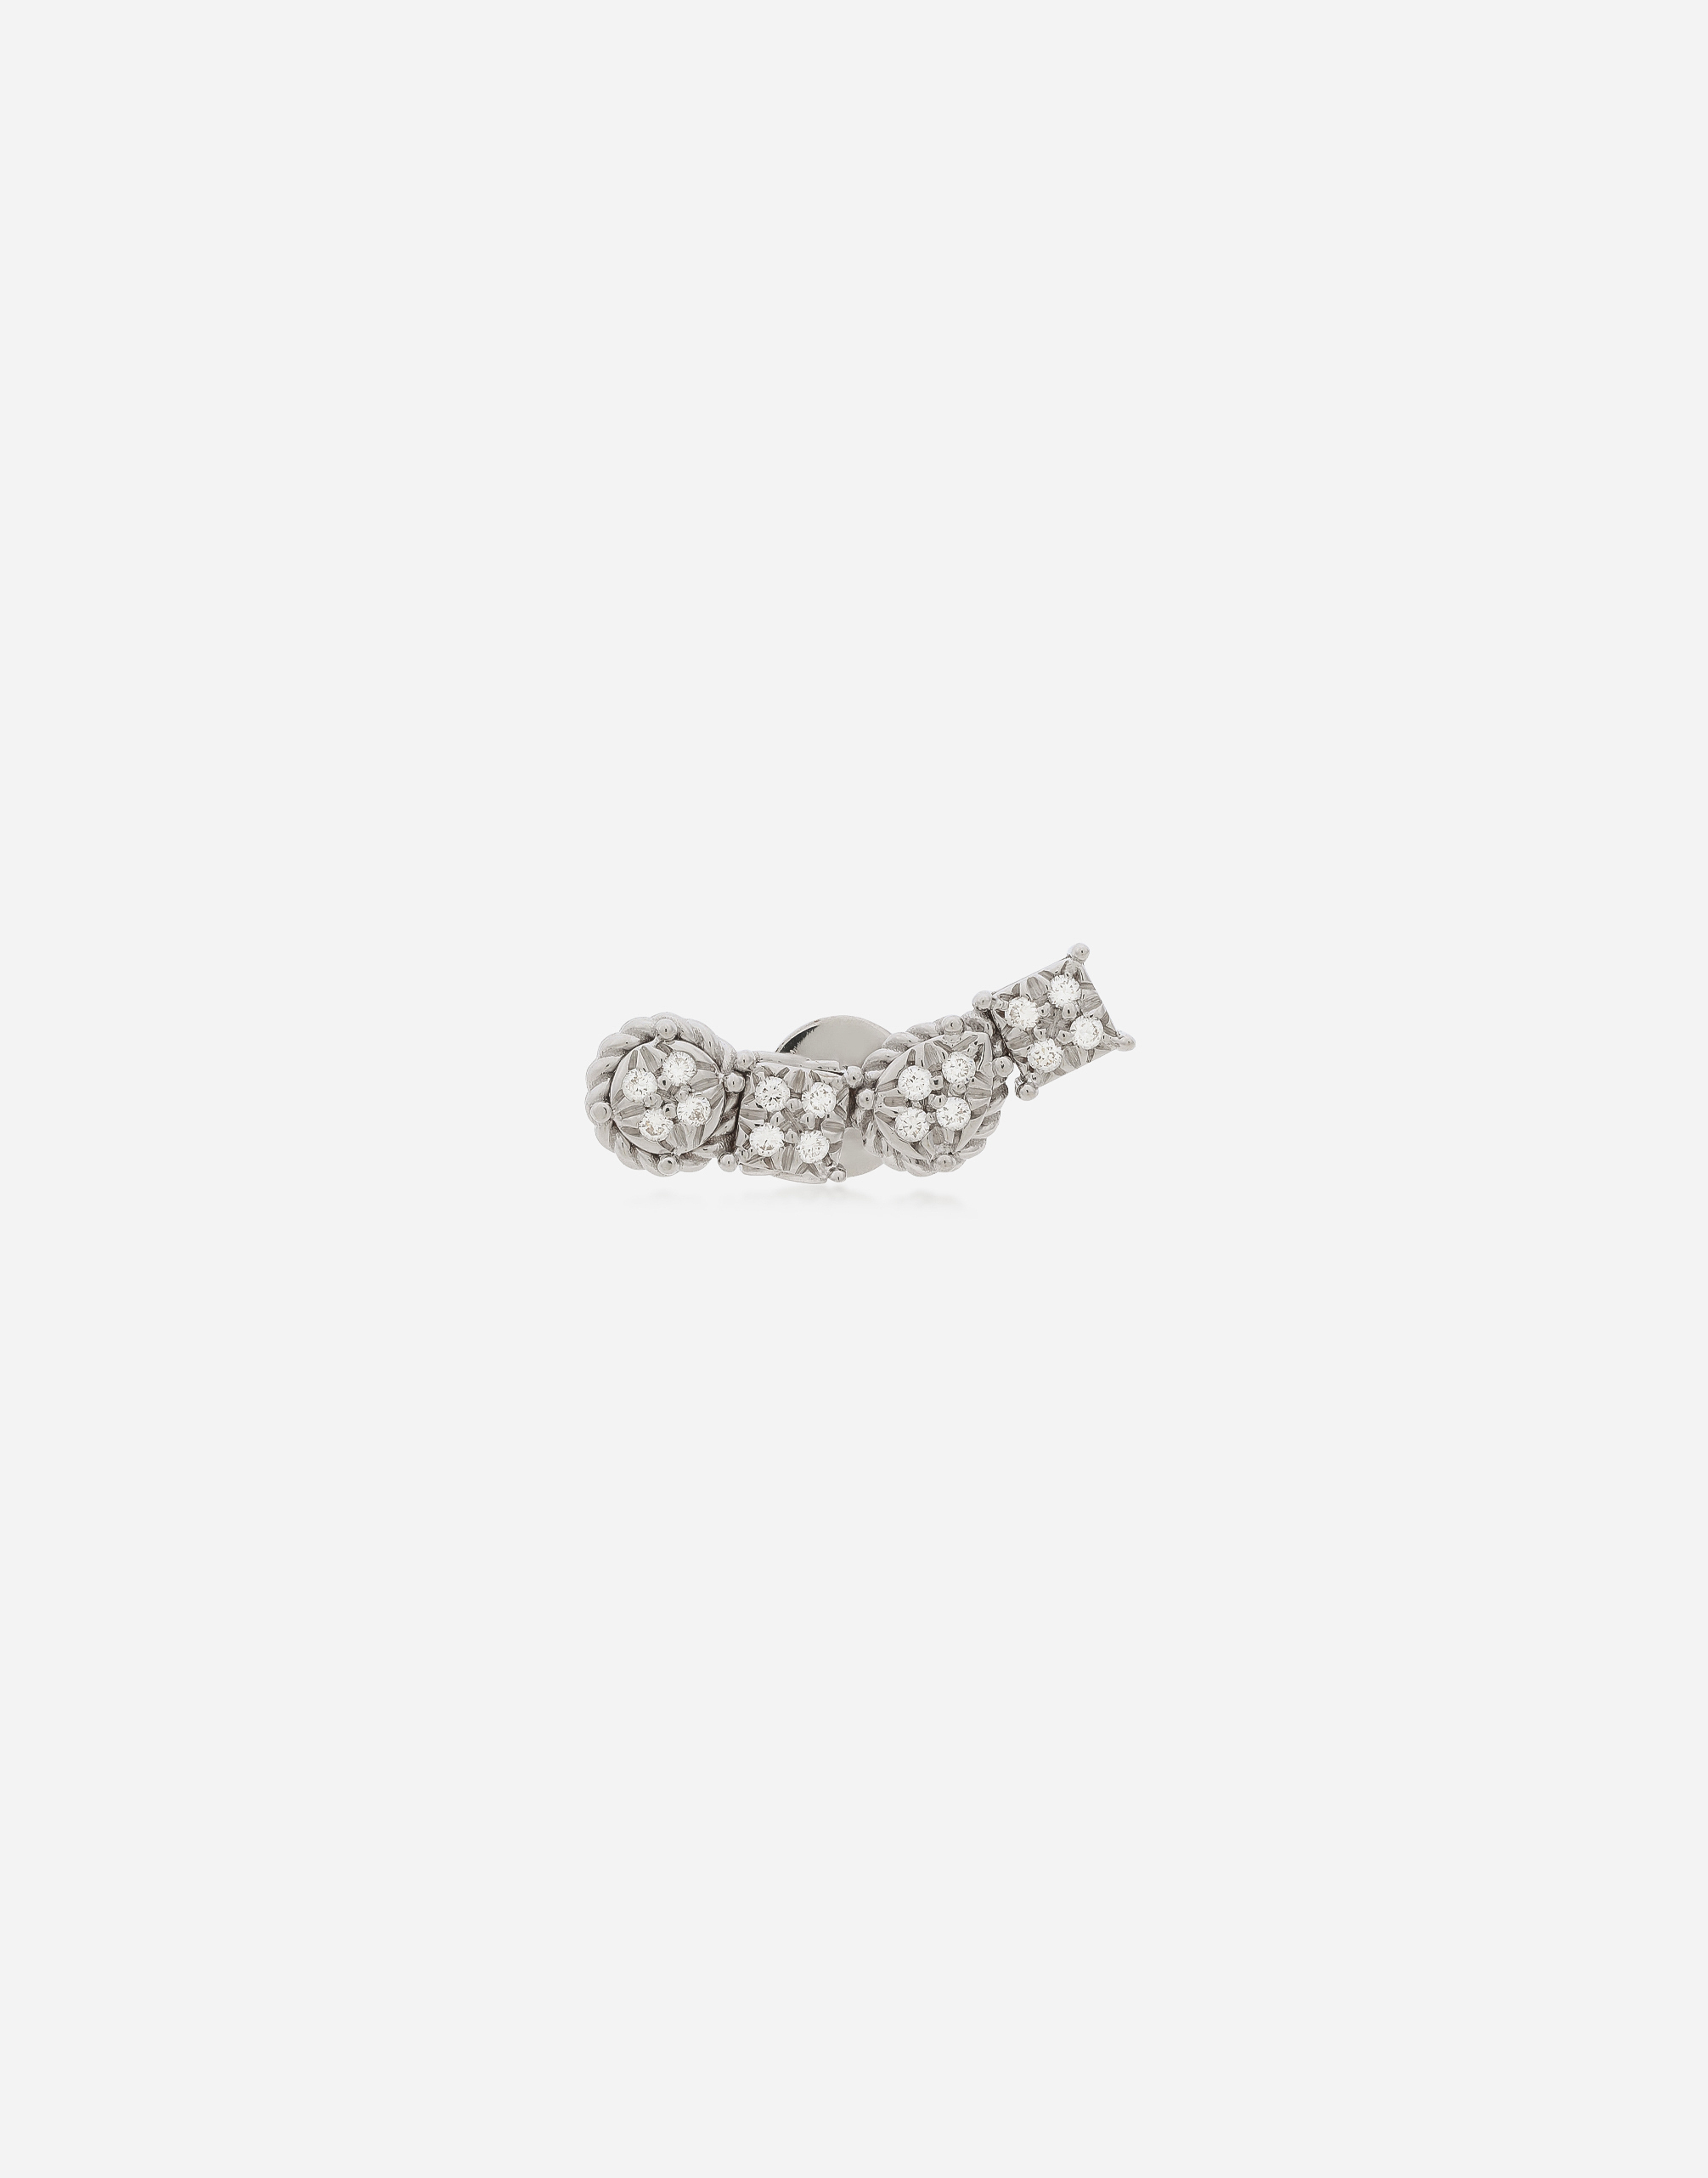 Dolce & Gabbana Single Earring In White Gold 18kt With Diamonds Pavé